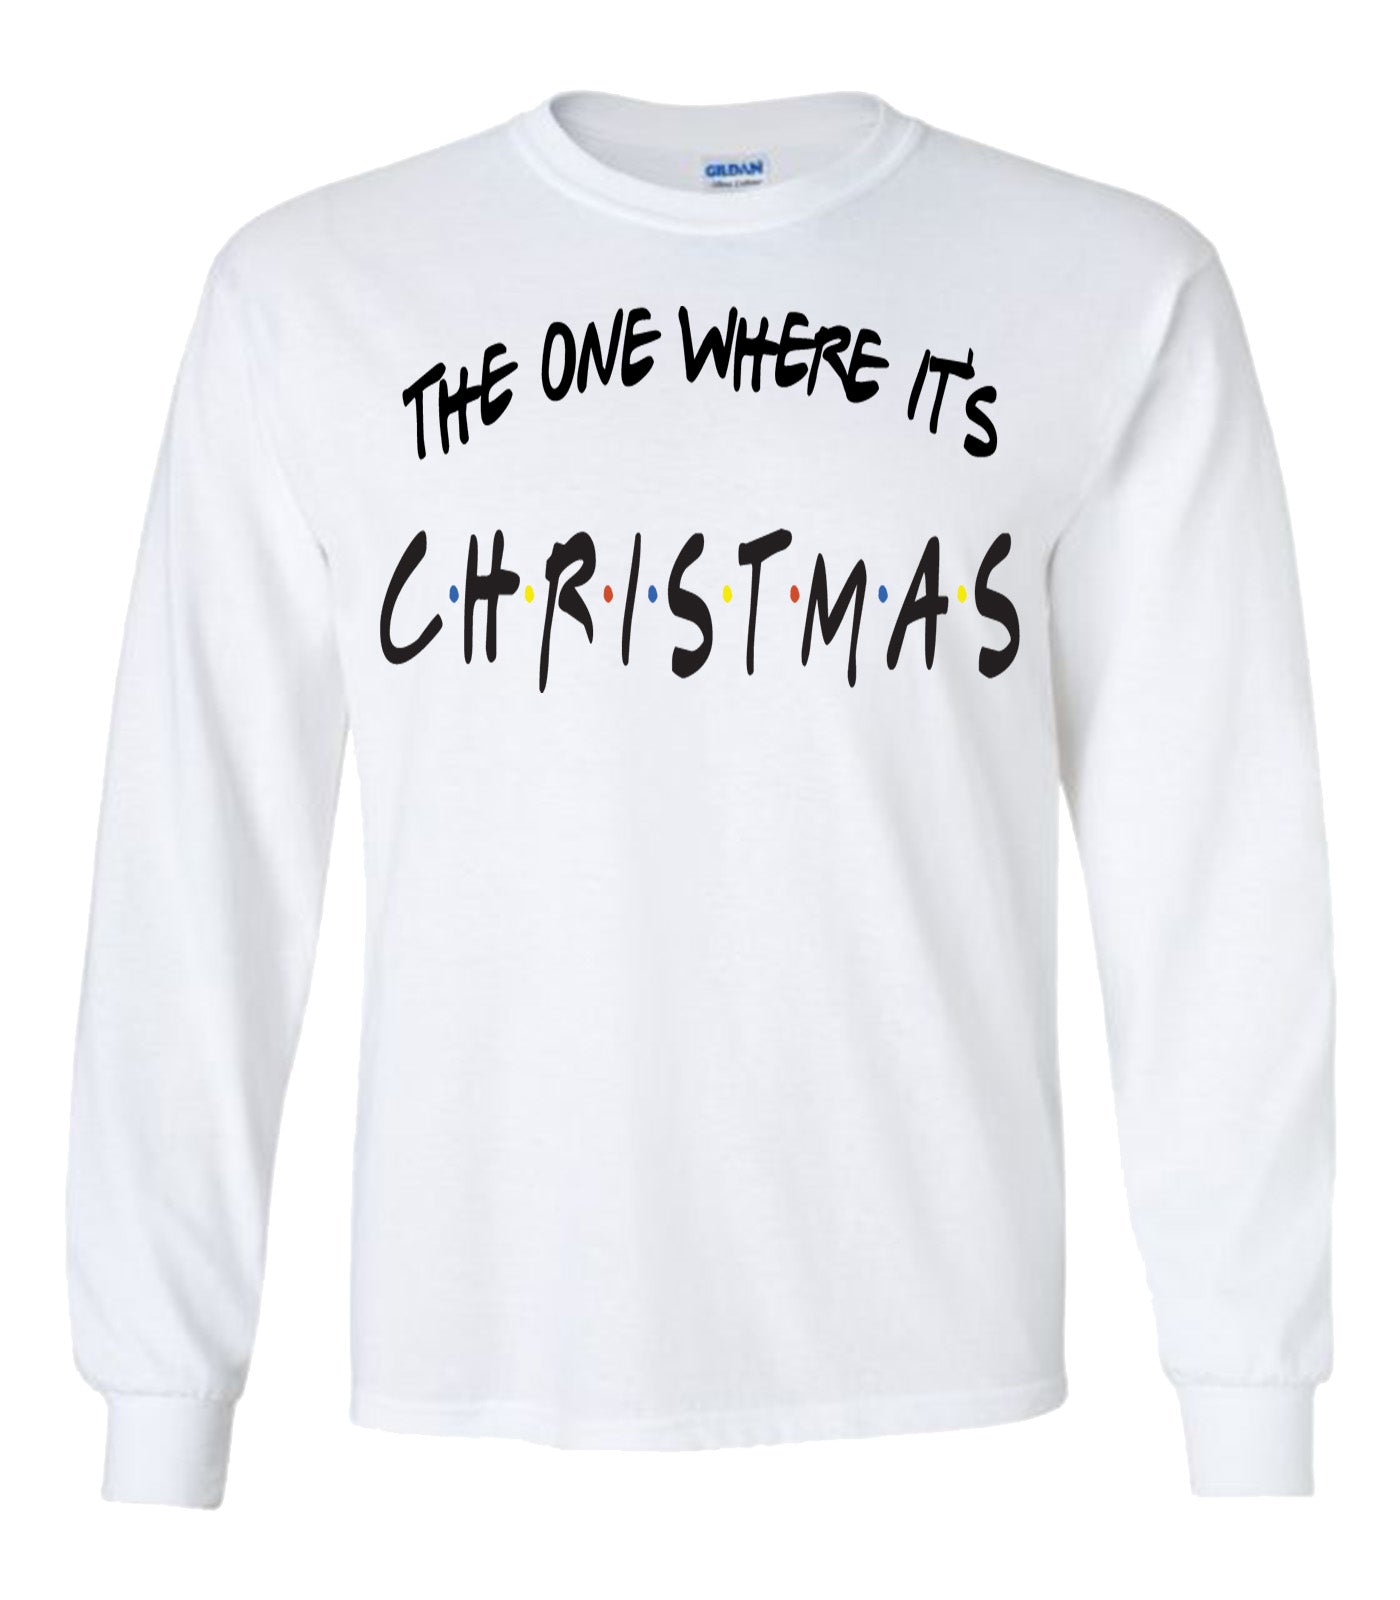 The One Where It's Christmas Friends Tee - Southern Grace Creations